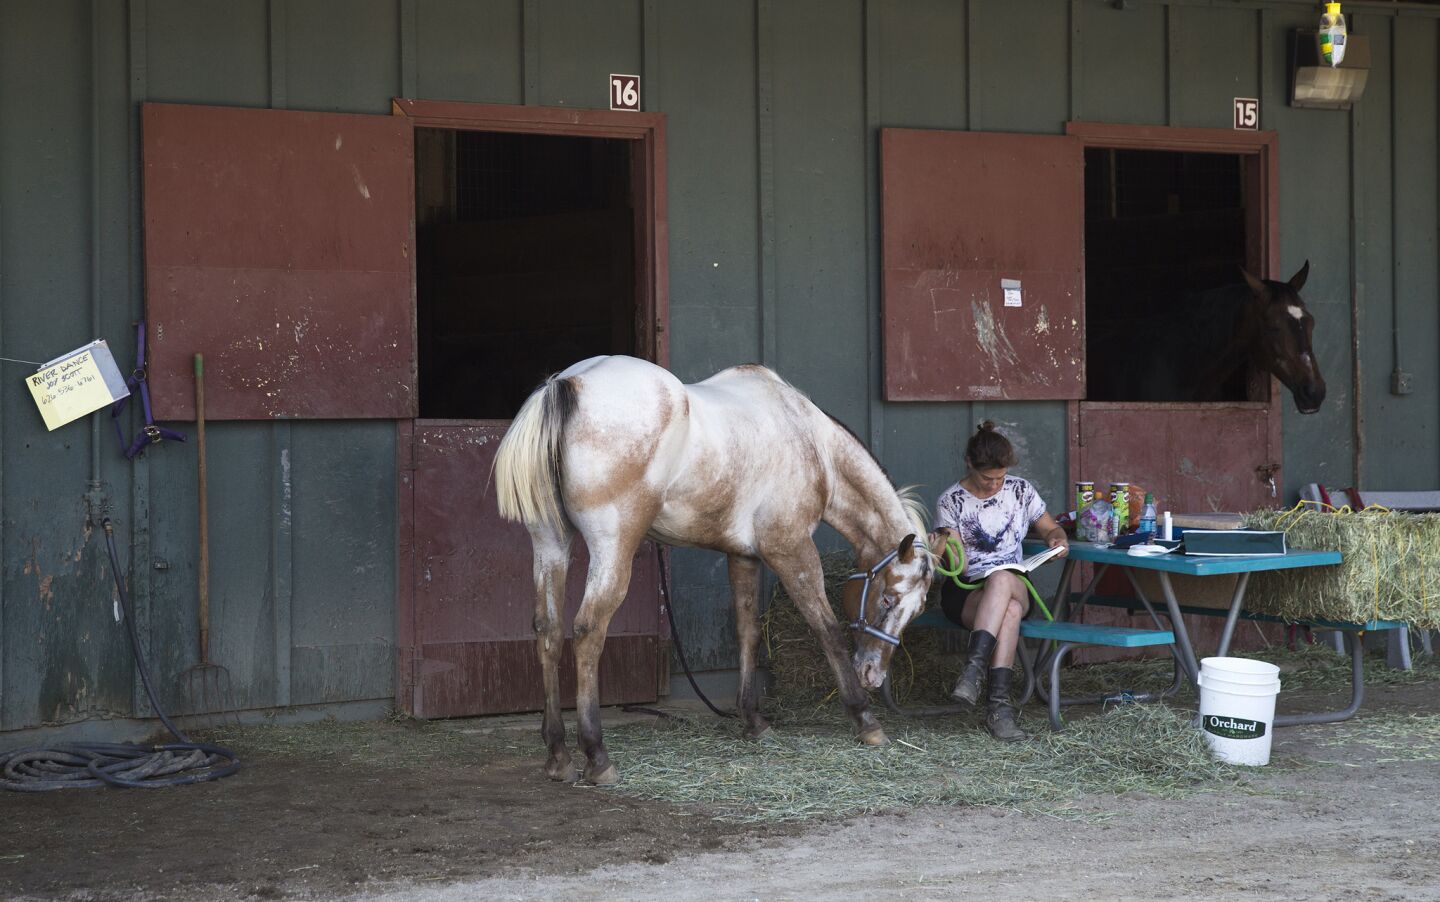 Elizabeth Stolz of Duarte reads a book next to her horse Rhiannon at the Fairplex.